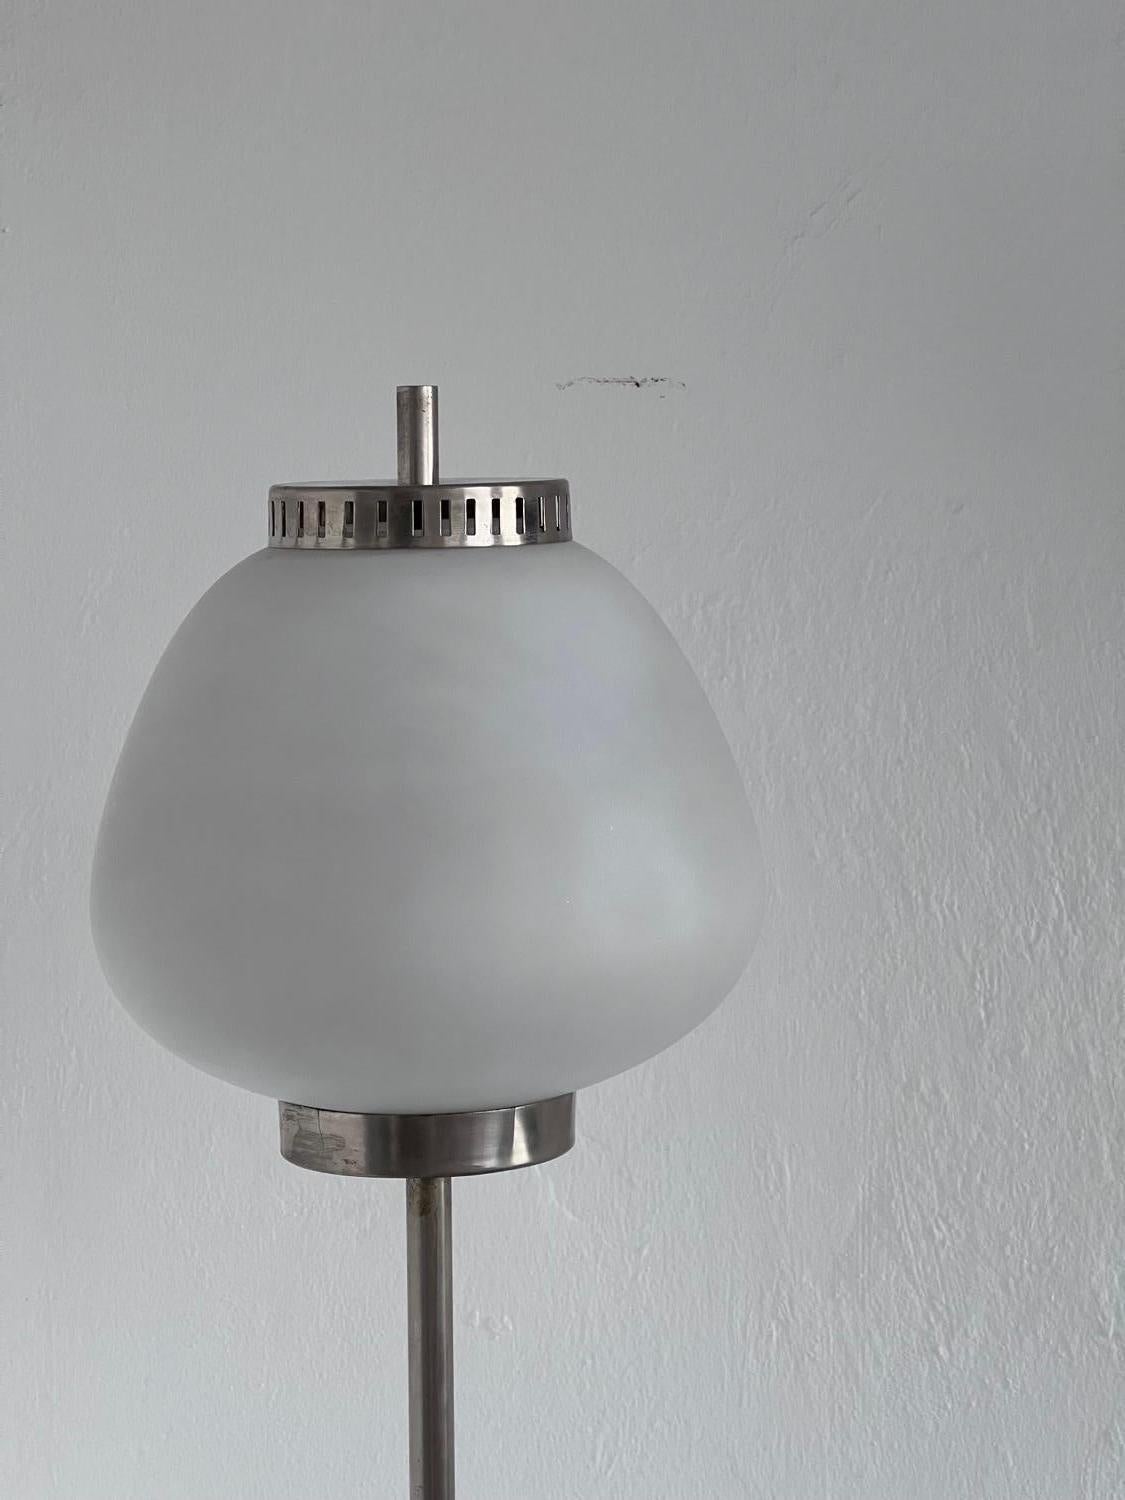 Mid-Century Modern Lamp - Stilnovo Floor Lamp - Collectible Italian Light

Rare floor lamp by Italian manufacturer Stilnovo, made in the 1950s and crafted in steel, marble and opaline glass. A thin brushed steel stem holds an apple-shaped globe in